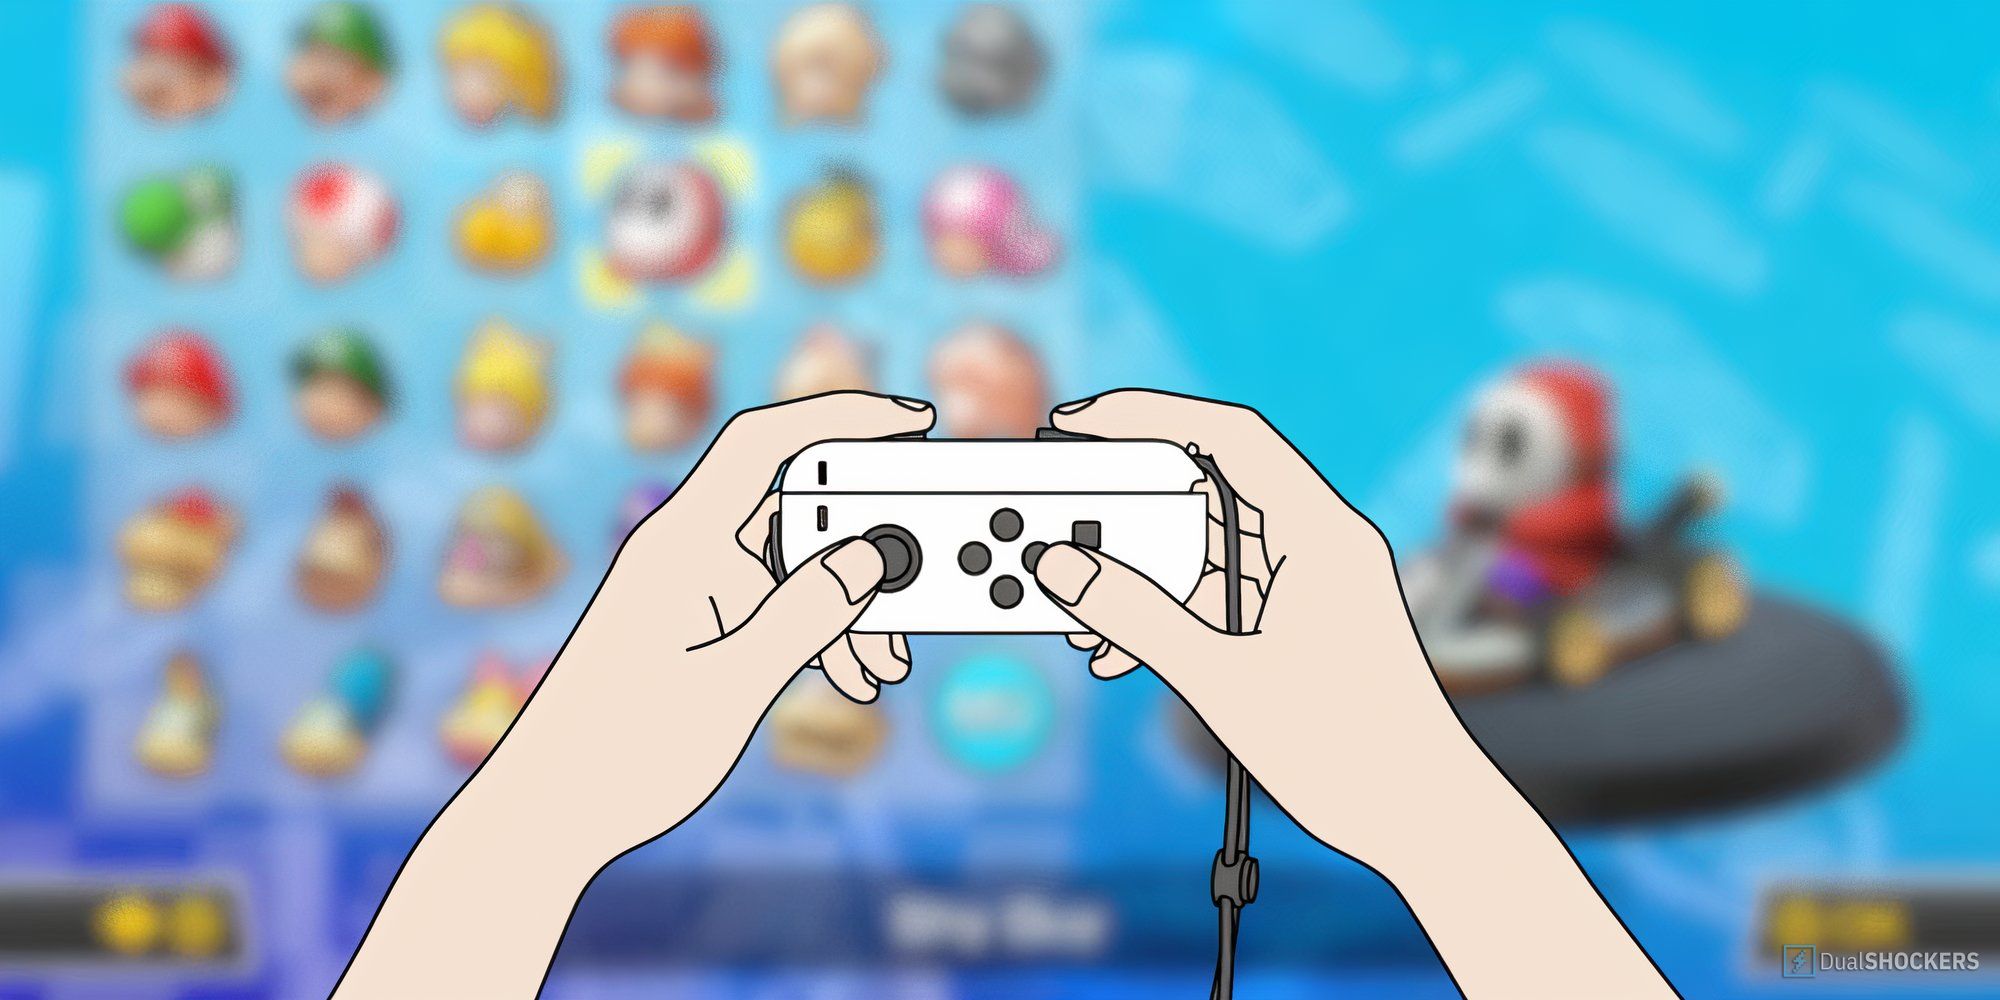 Feature image with a Nintendo Switch Joy-Con Holding Diagram on a blurred background of the Shy Guy selection screen in Mario Kart 8.